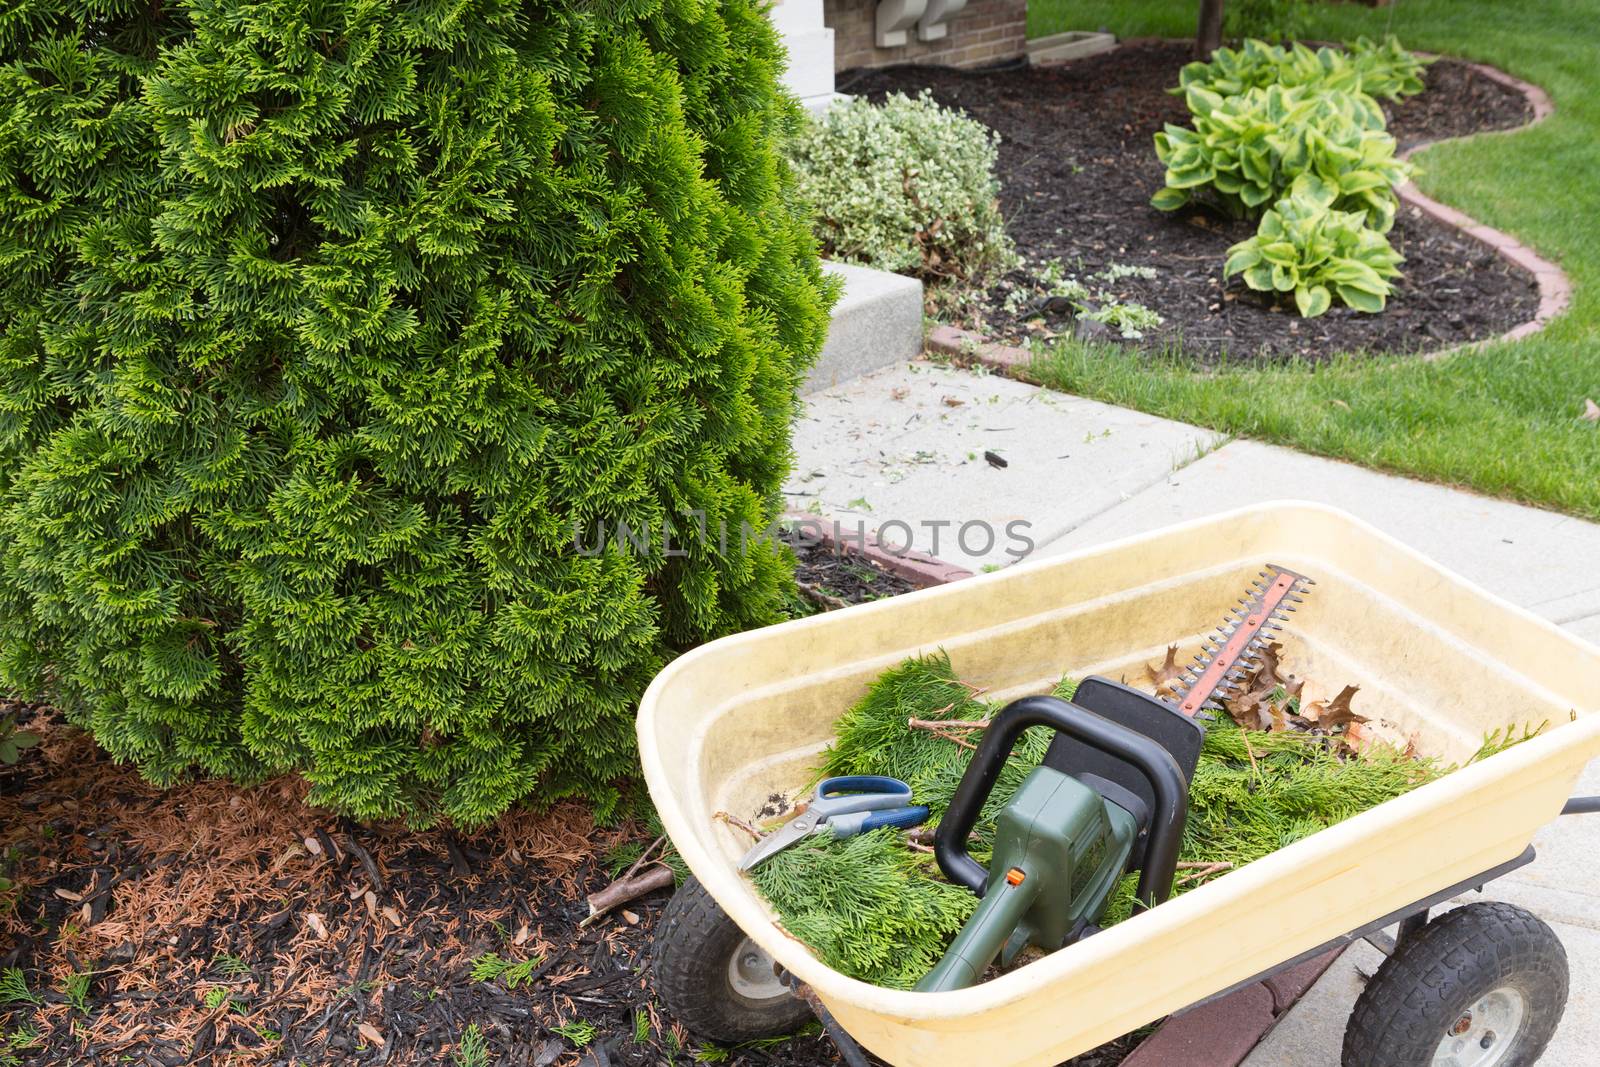 Using a hedge trimmer to trim Arborvitaes or evergreen Thuja trees around the house to maintain their ornamental tapering shape in spring